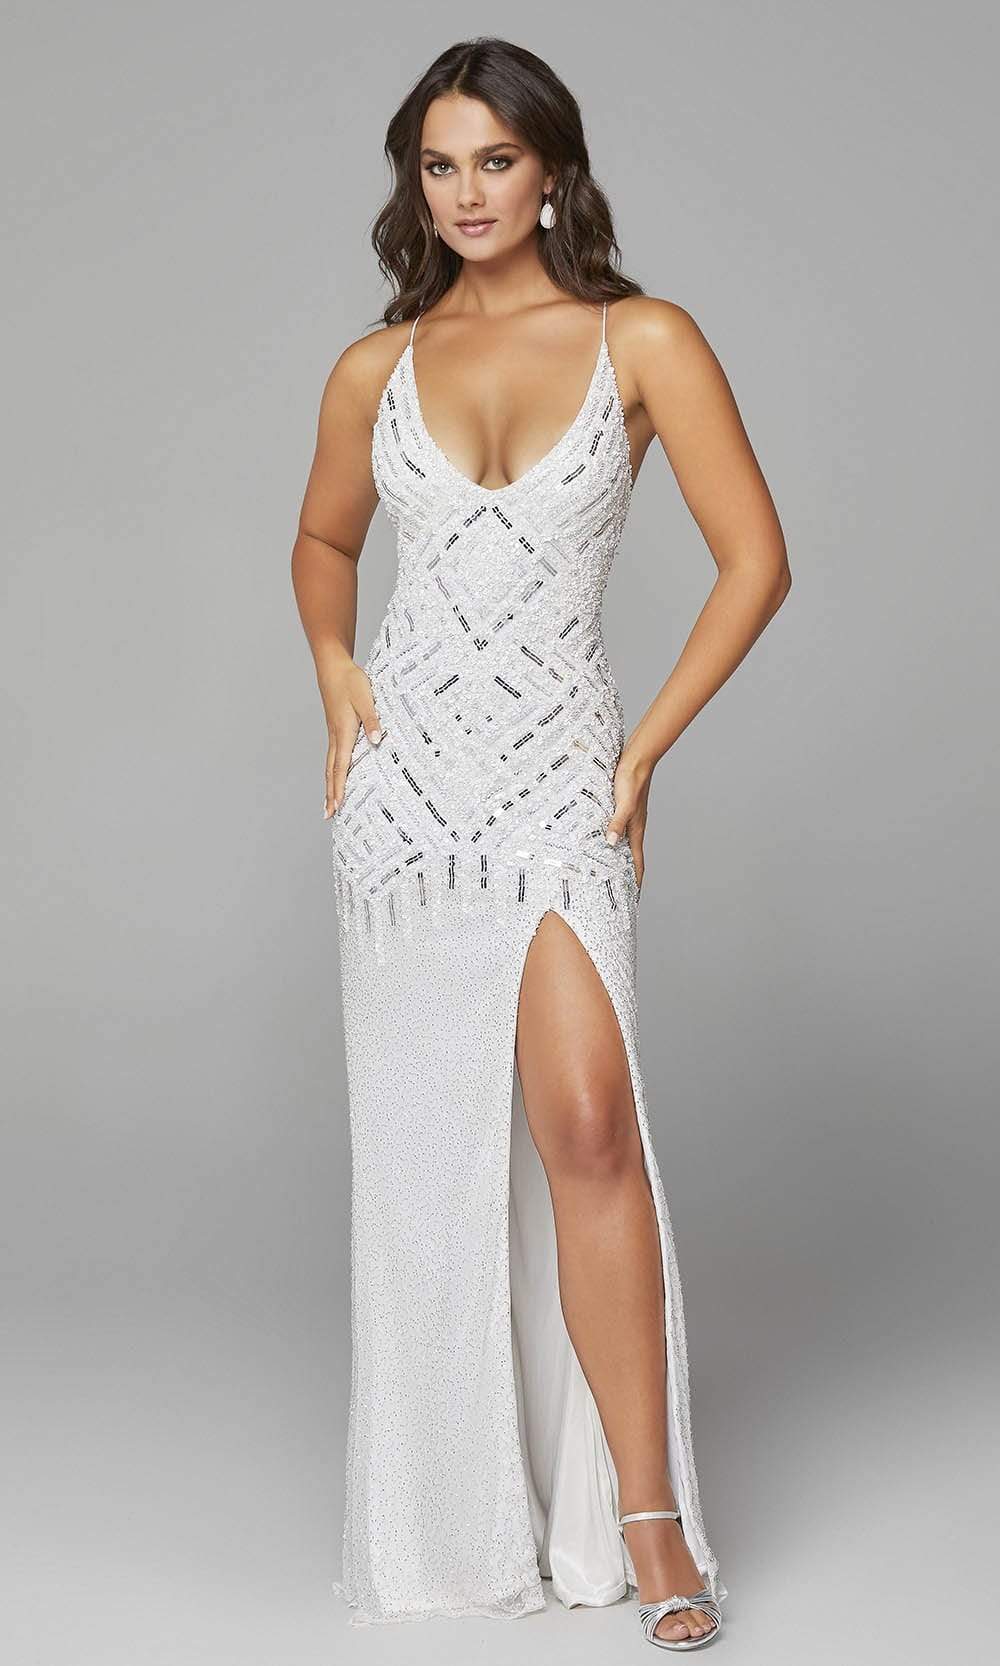 Primavera Couture - 3644 Strappy Sequin Dress with Slit Evening Dresses 00 / Ivory